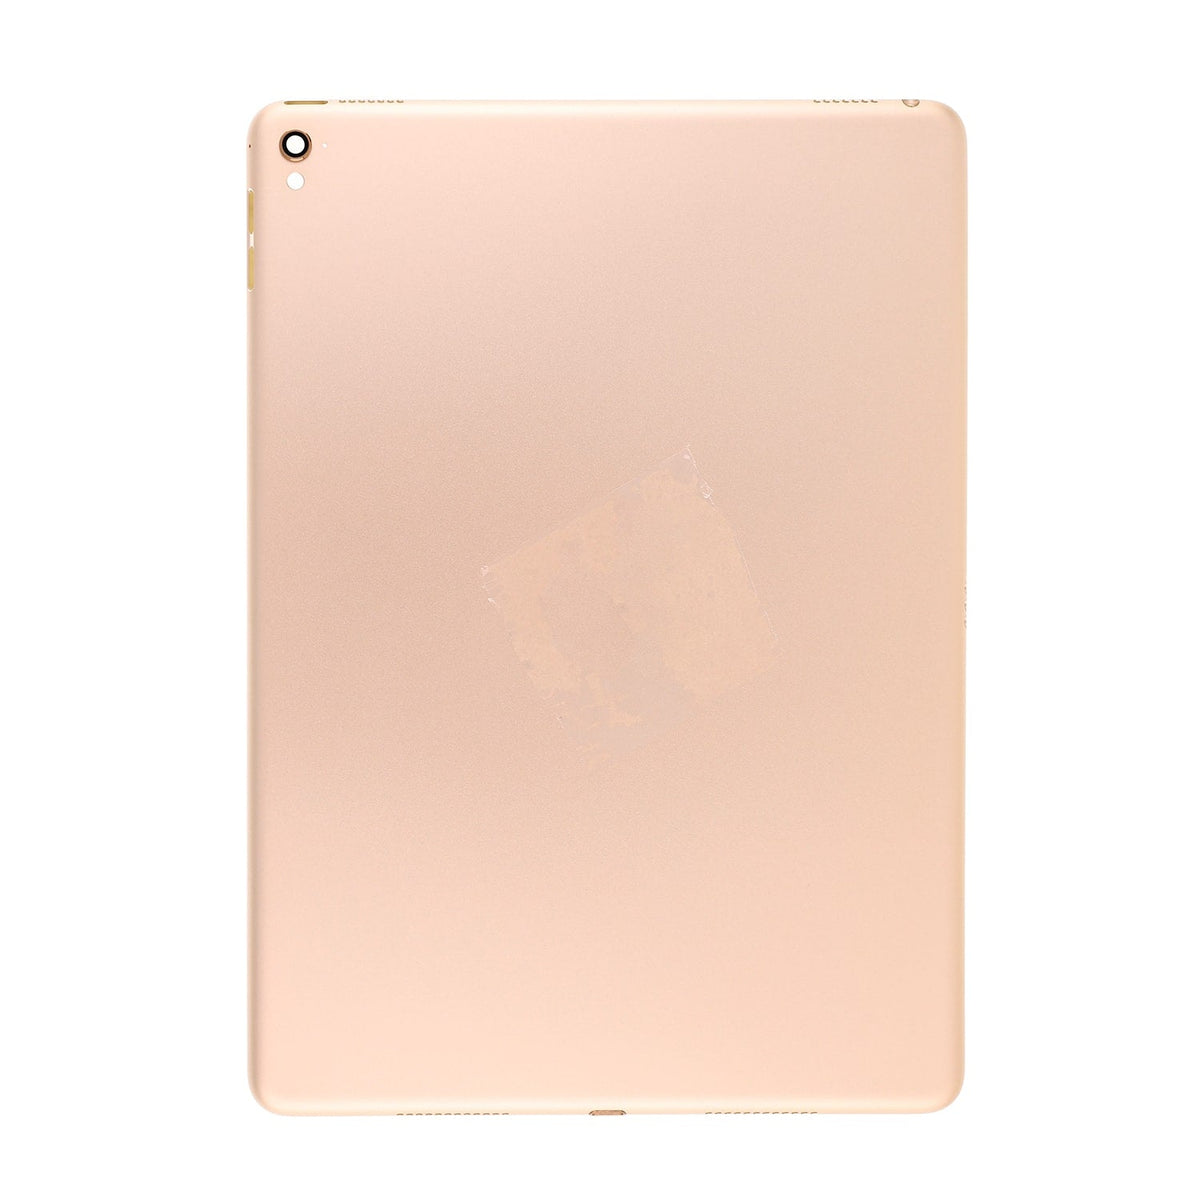 BACK COVER WIFI VERSION FOR IPAD PRO 9.7"- GOLD